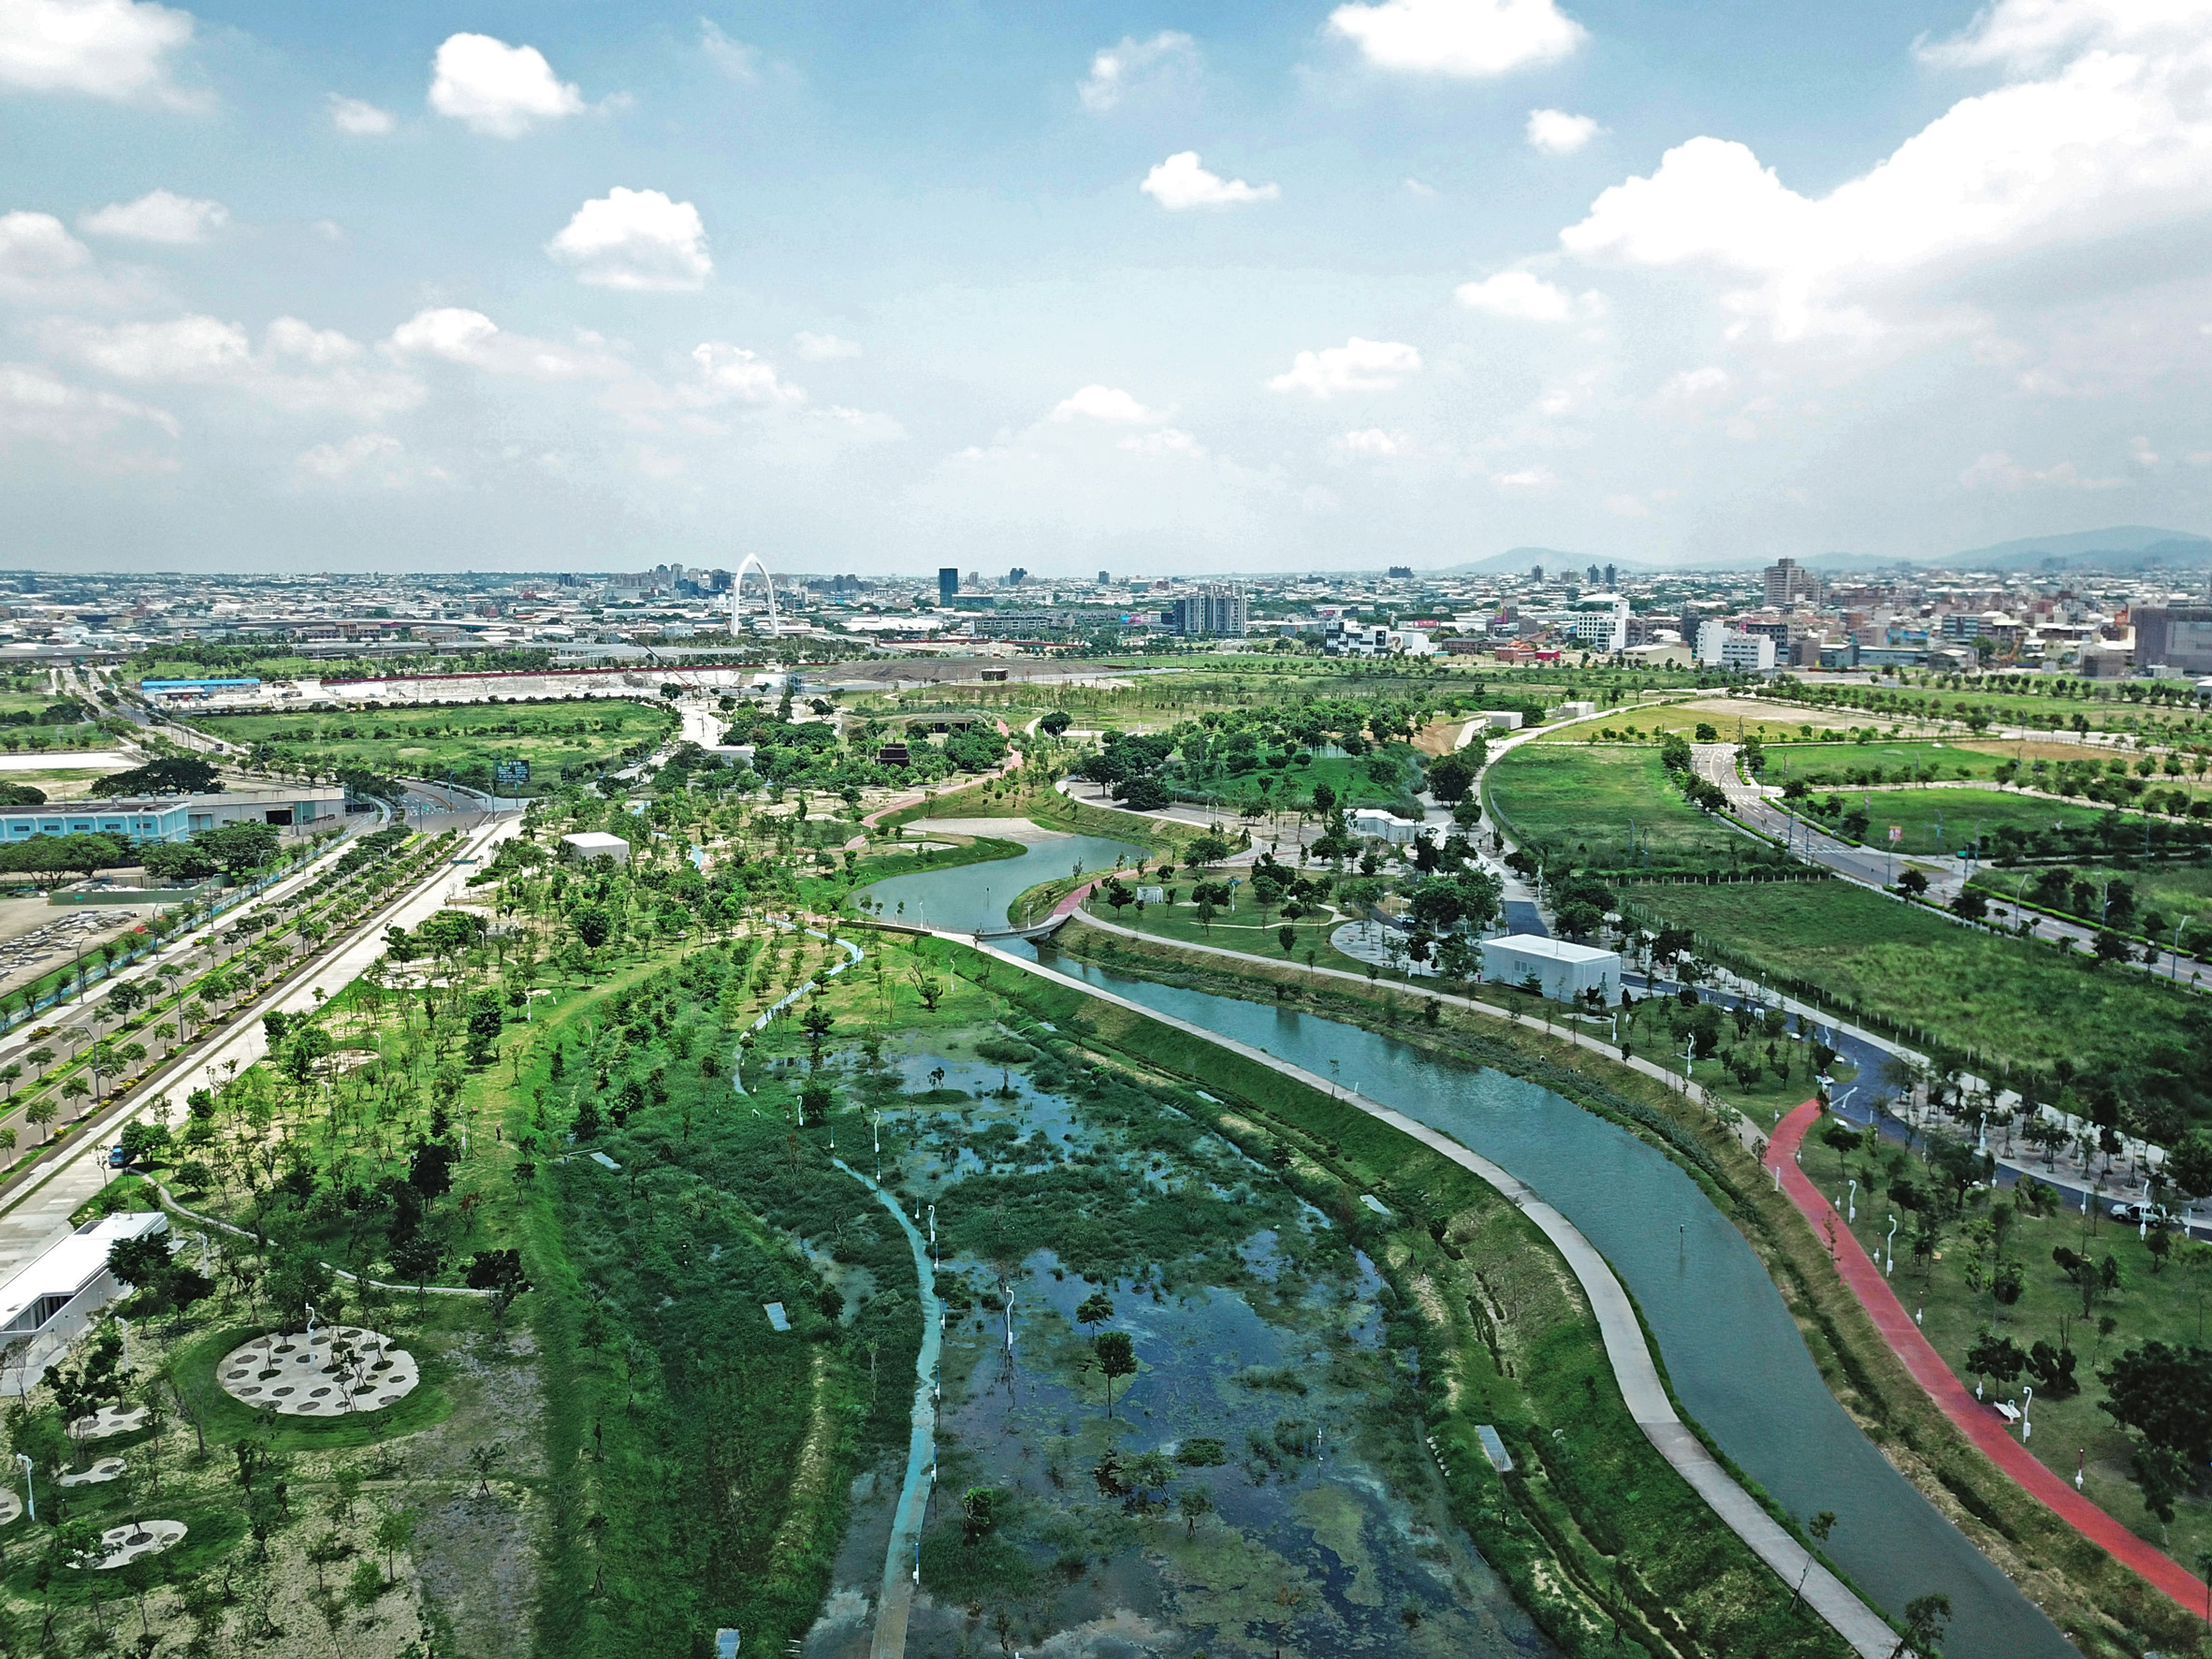 Birds-eye view of Phase Shifts Park designed by landscape architects Mosbach Paysagistes in Taichung, Taiwan